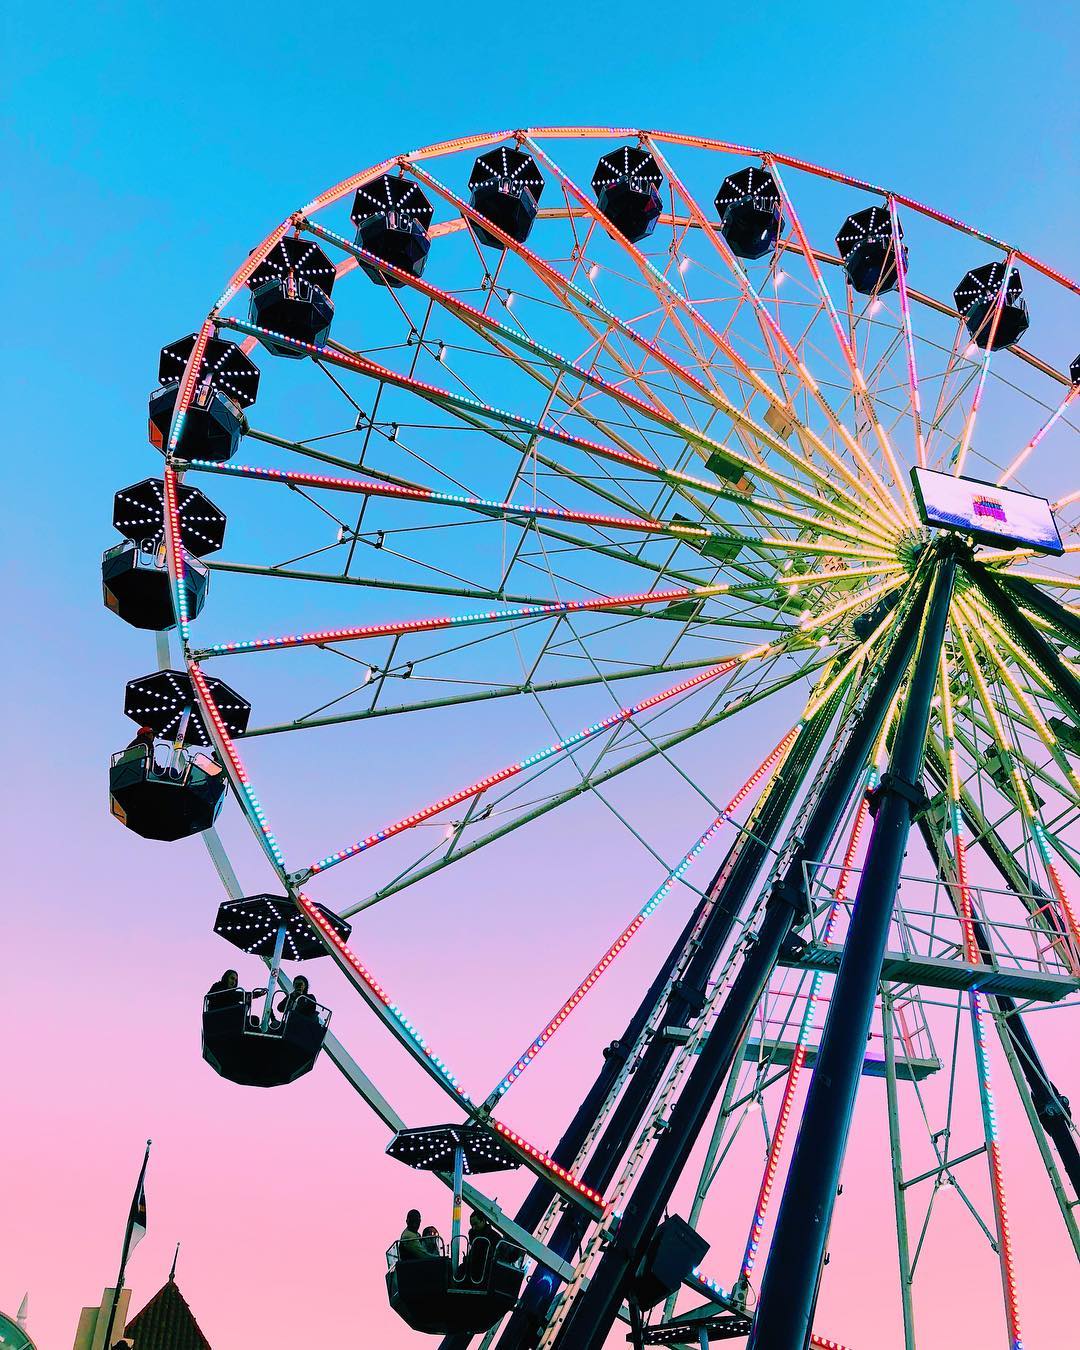 View from under large ferris wheel at dusk at North Carolina State Fair. Photo by Instagram user @sophienelise